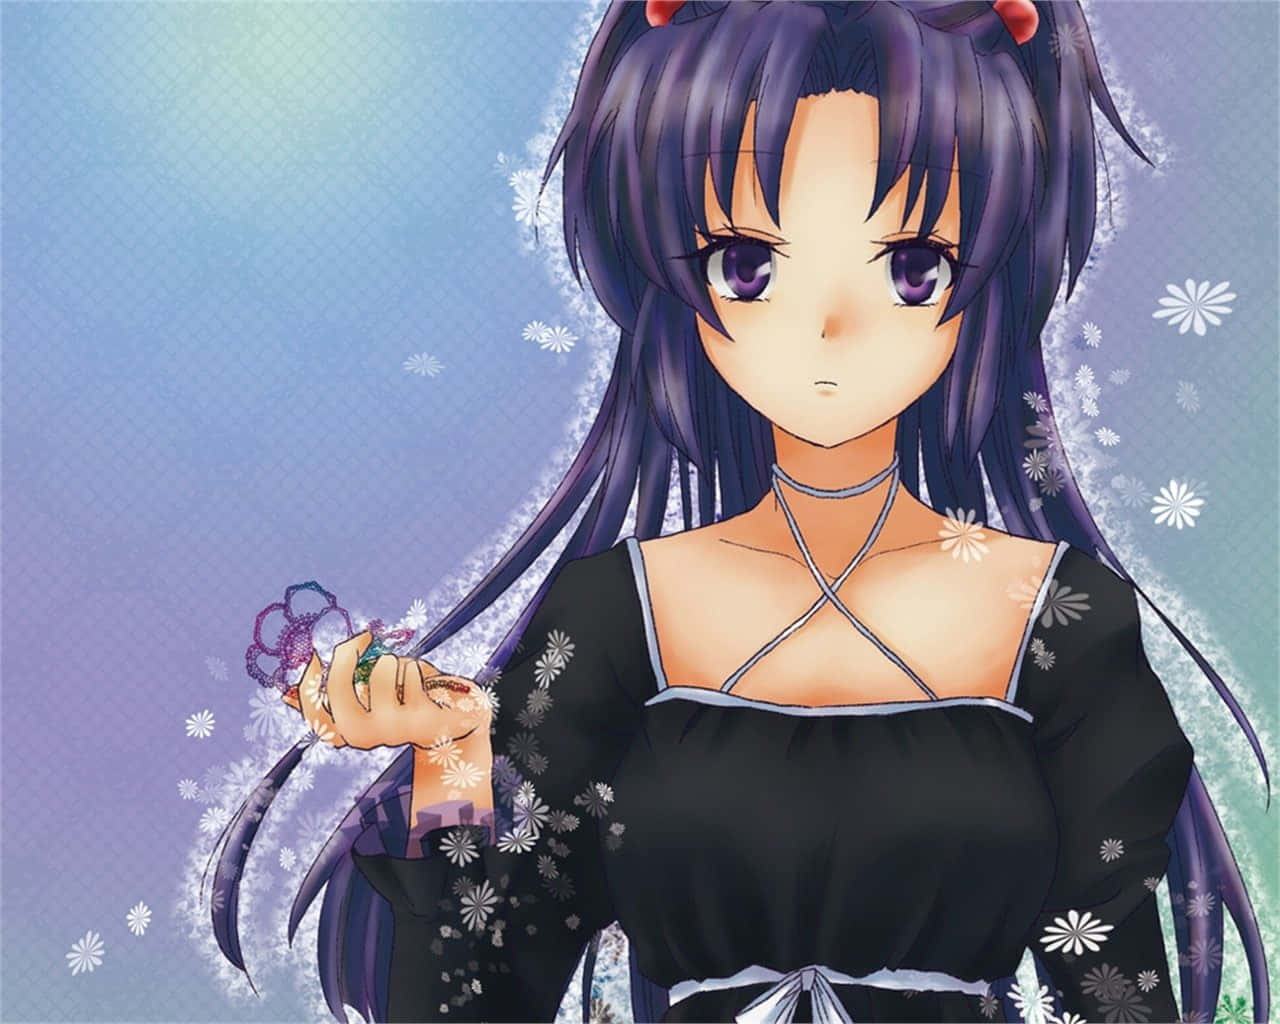 "kotomi Ichinose - The Brilliant And Mysterious" Wallpaper